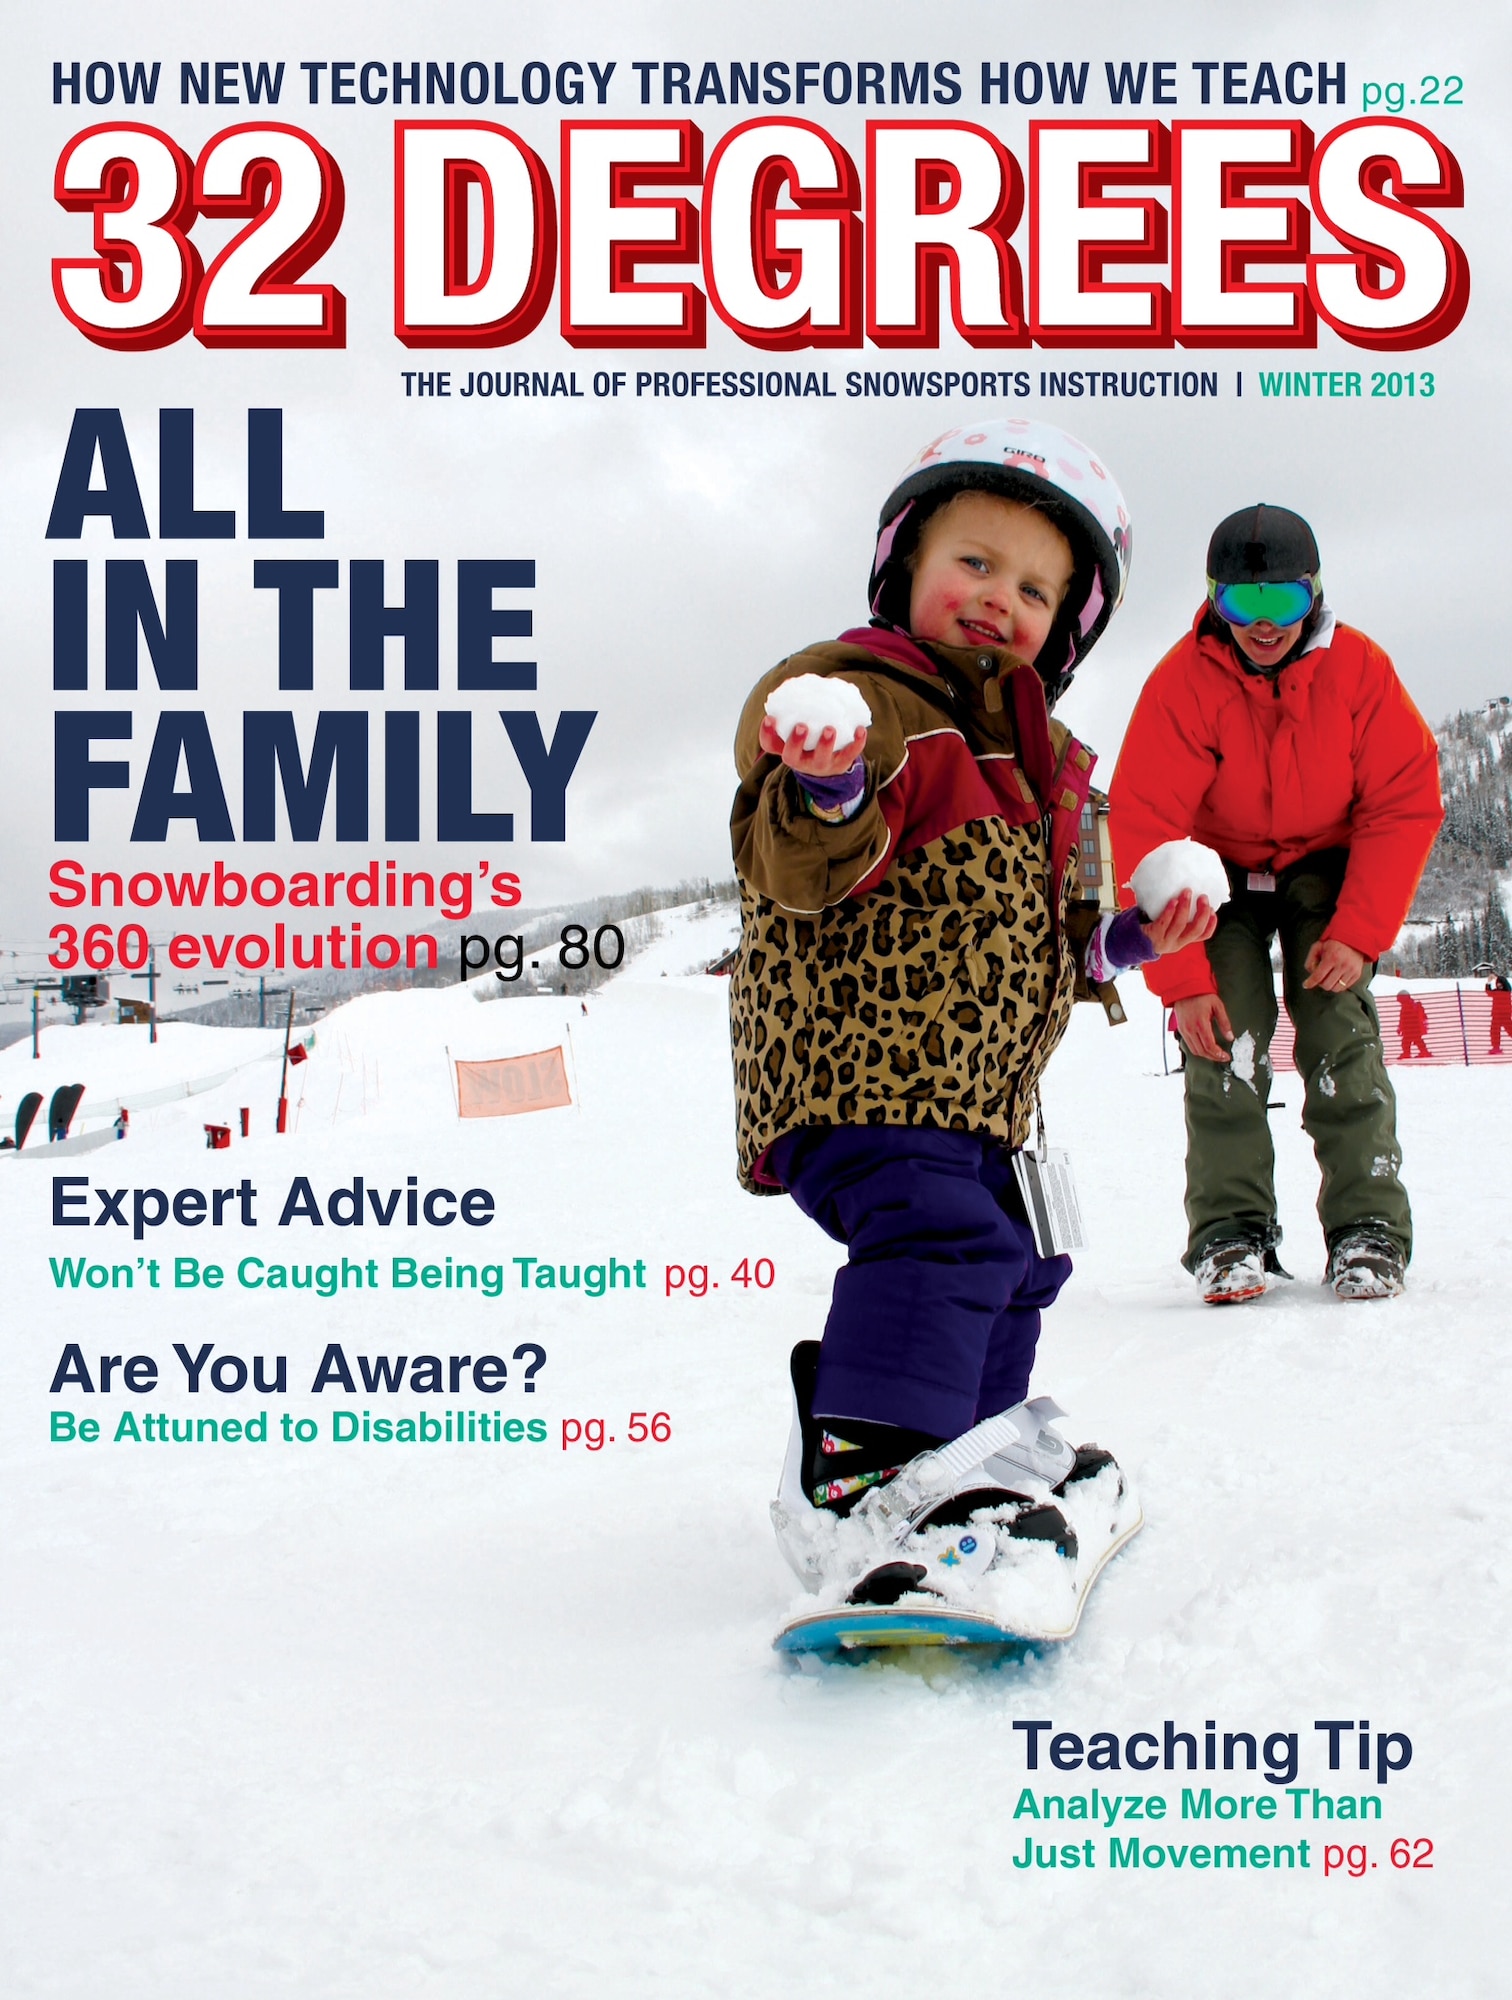 Capt. Adam Ertsey, Air Reserve Personnel Center, and his daughter Norah, were recently on the cover and featured in a recent edition of ‘32 Degrees’ magazine. The picture was taken on Steamboat Mountain in February just before Capt. Ertsey’s deployment.  “Norah wasn’t 3-years old but she had the best of times, which attracted the attention of the cameraman,” Ertsey said. “The suggested age to start snowboarding was 6-8-years old, but we obviously weren't going to wait that long.”  Other pictures taken on the same day were already featured in the previous issue to accompany an article on early snowboard teaching. (U.S. Air Force photo/Capt. Adam Ertsey)